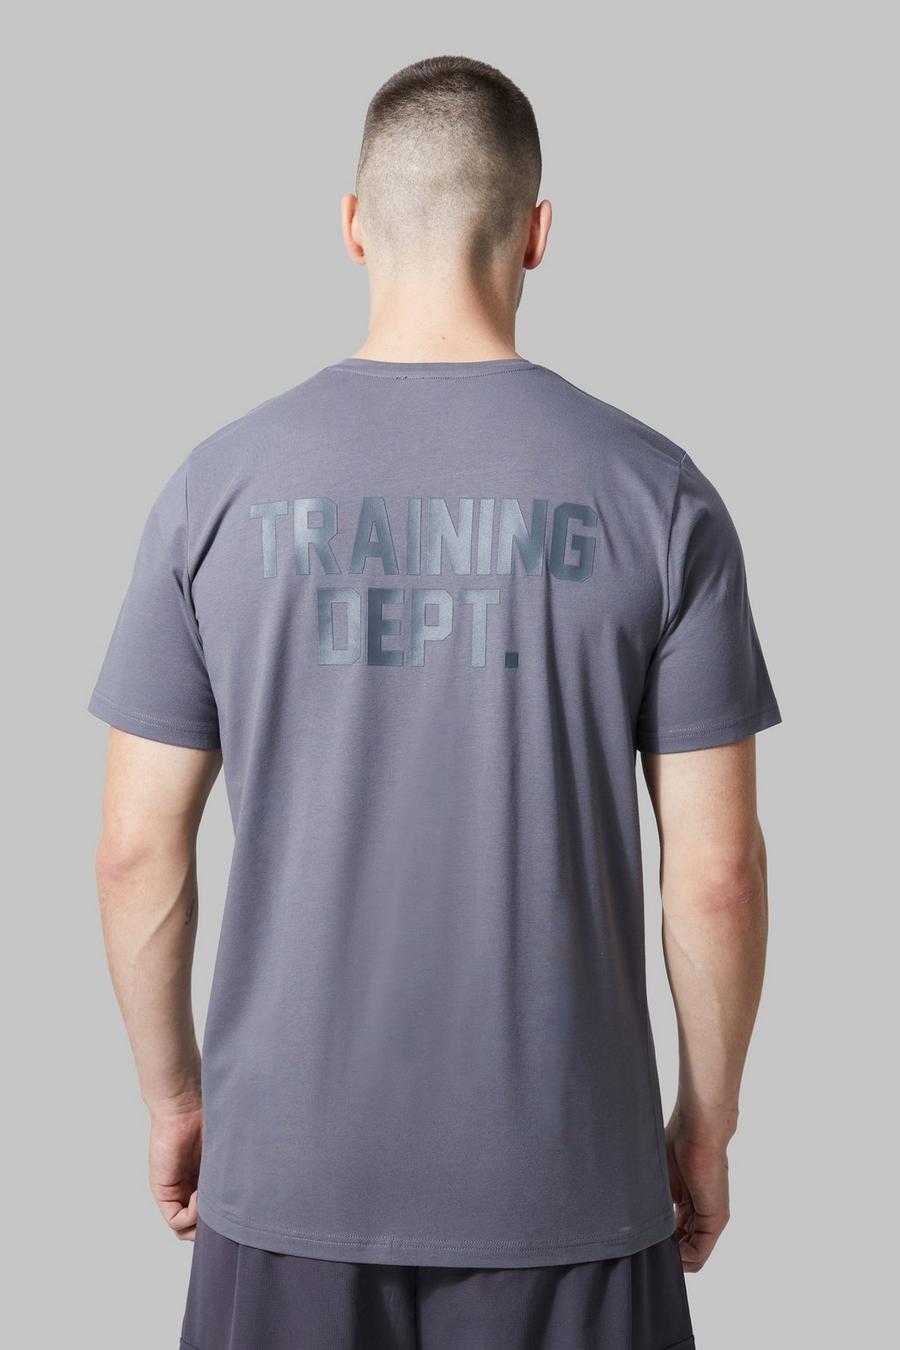 T-shirt Tall Active Training Dept per alta performance, Charcoal image number 1